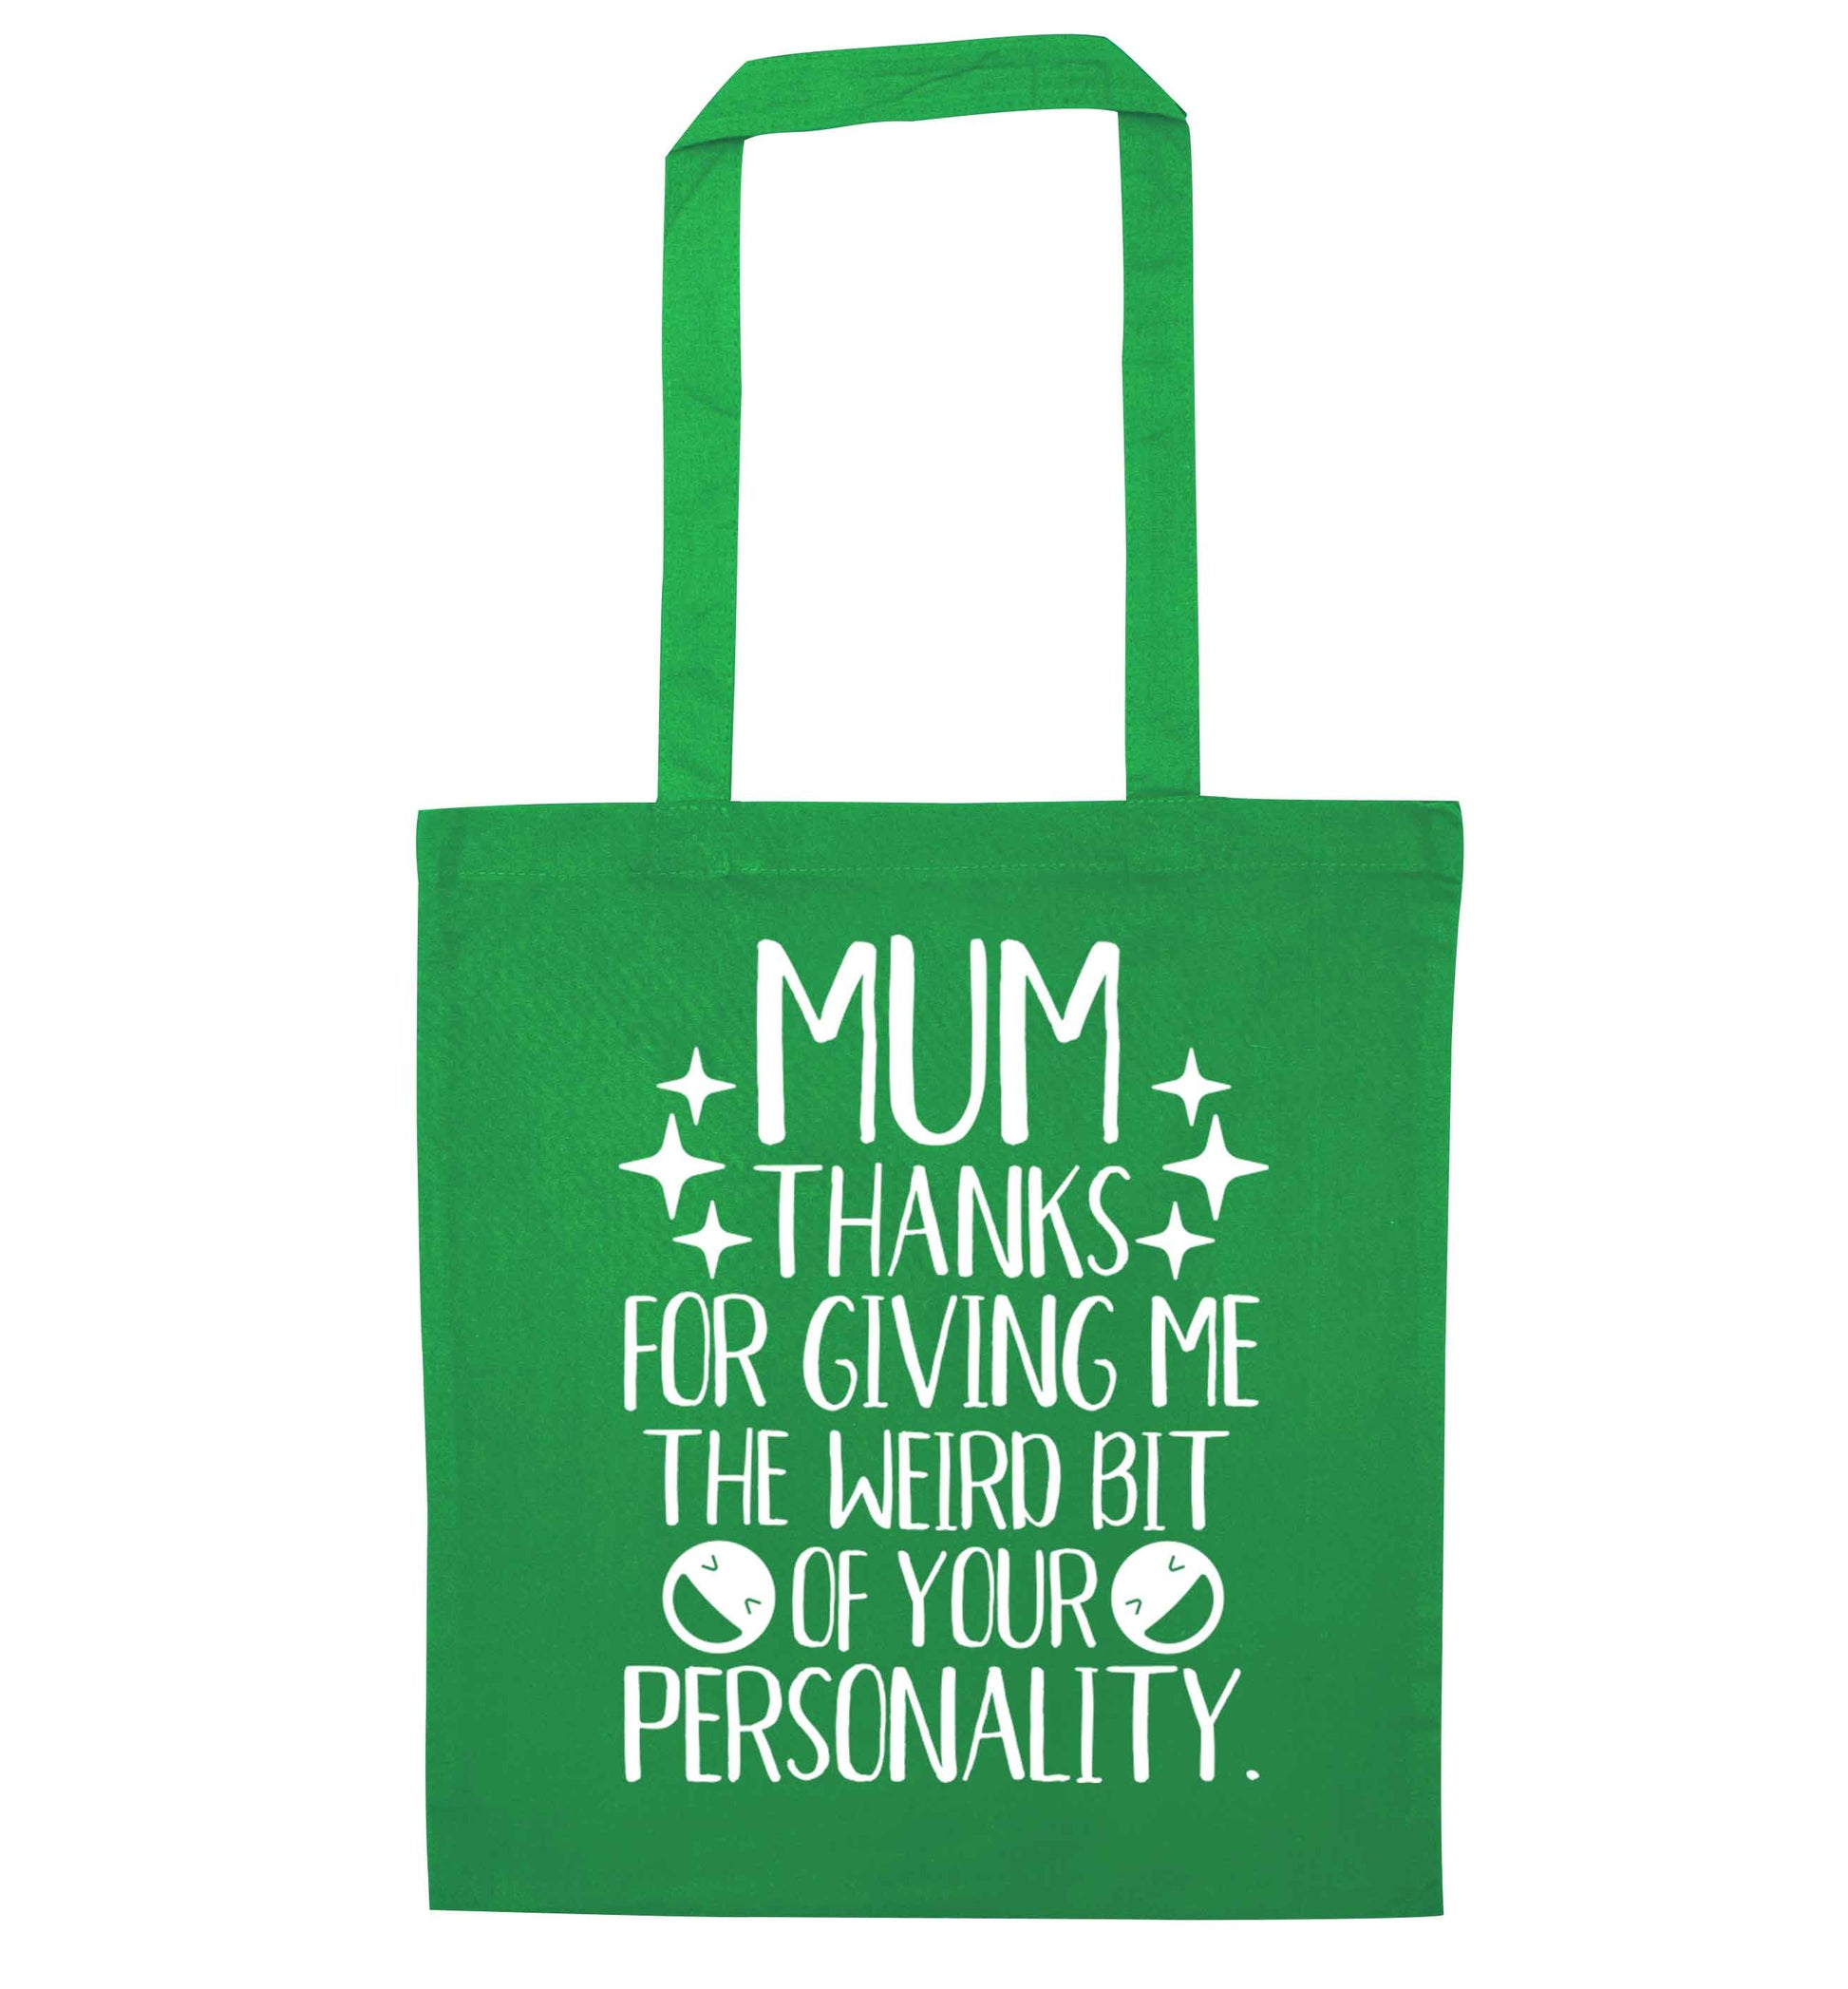 Mum thanks for giving me the weird bit of your personality green tote bag